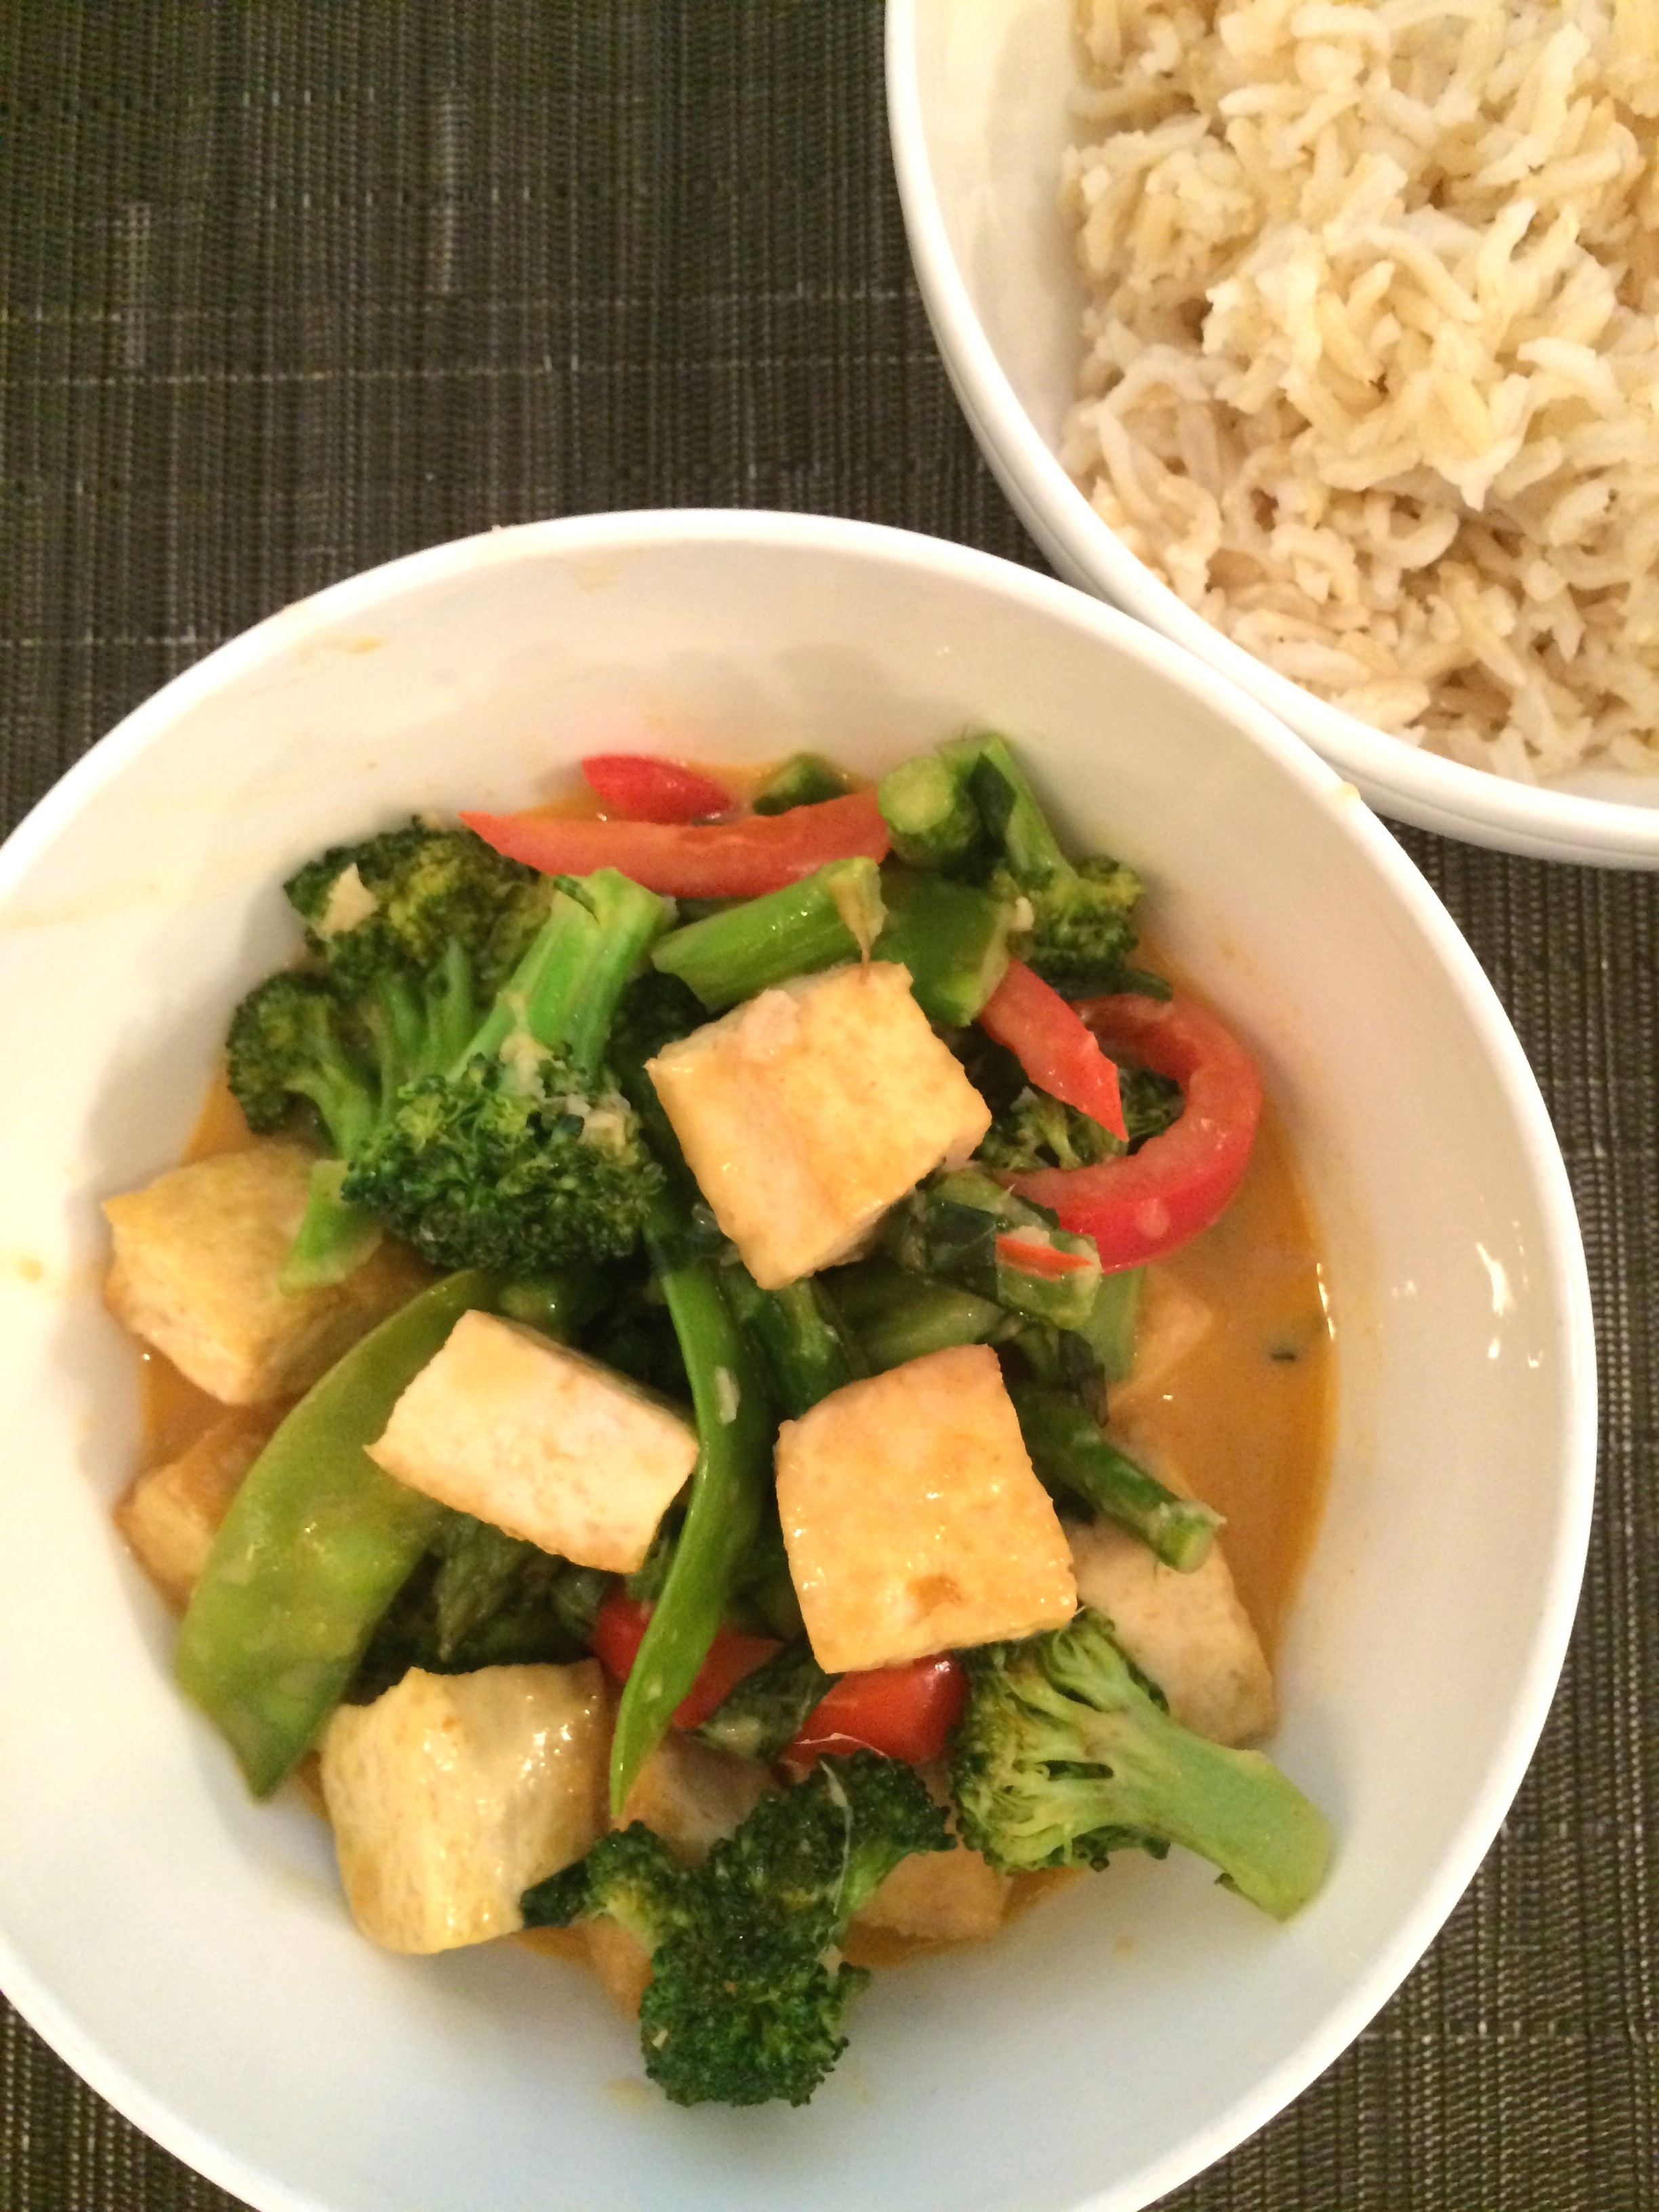 Coconut Red Curry With Tofu And Vegetables - The Pollan Family